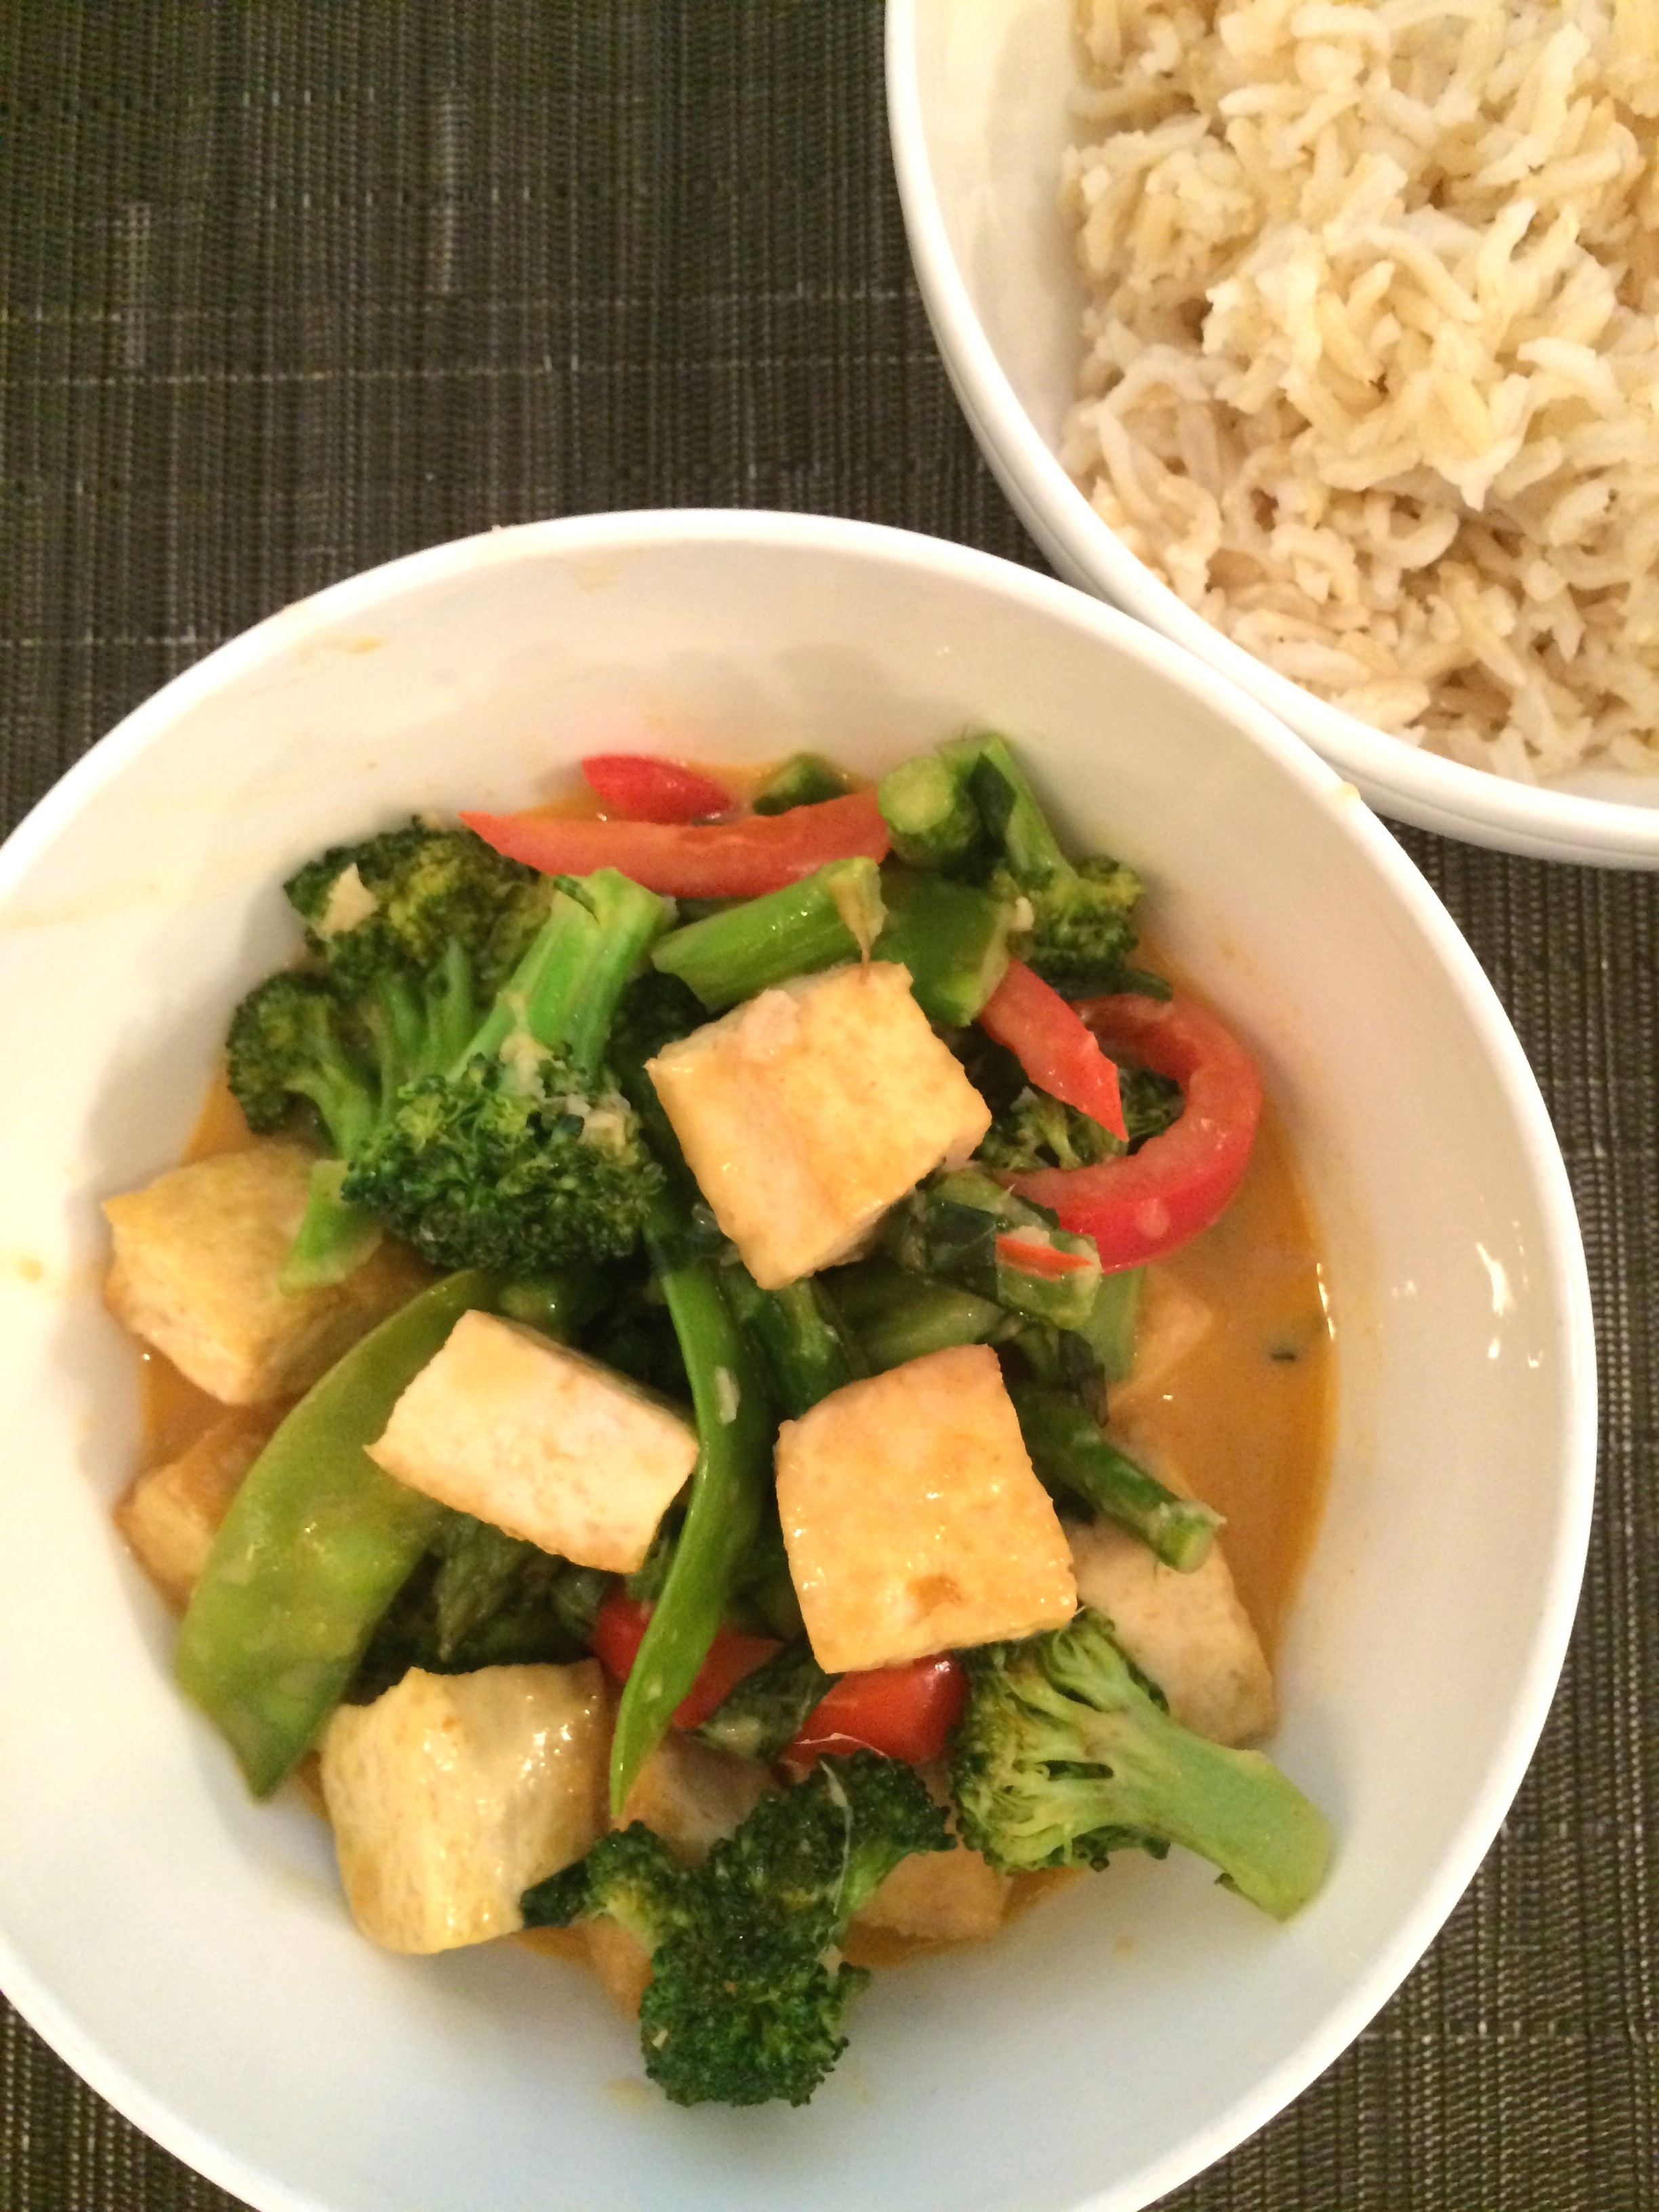 Coconut Red Curry With Tofu And Vegetables - The Pollan Family